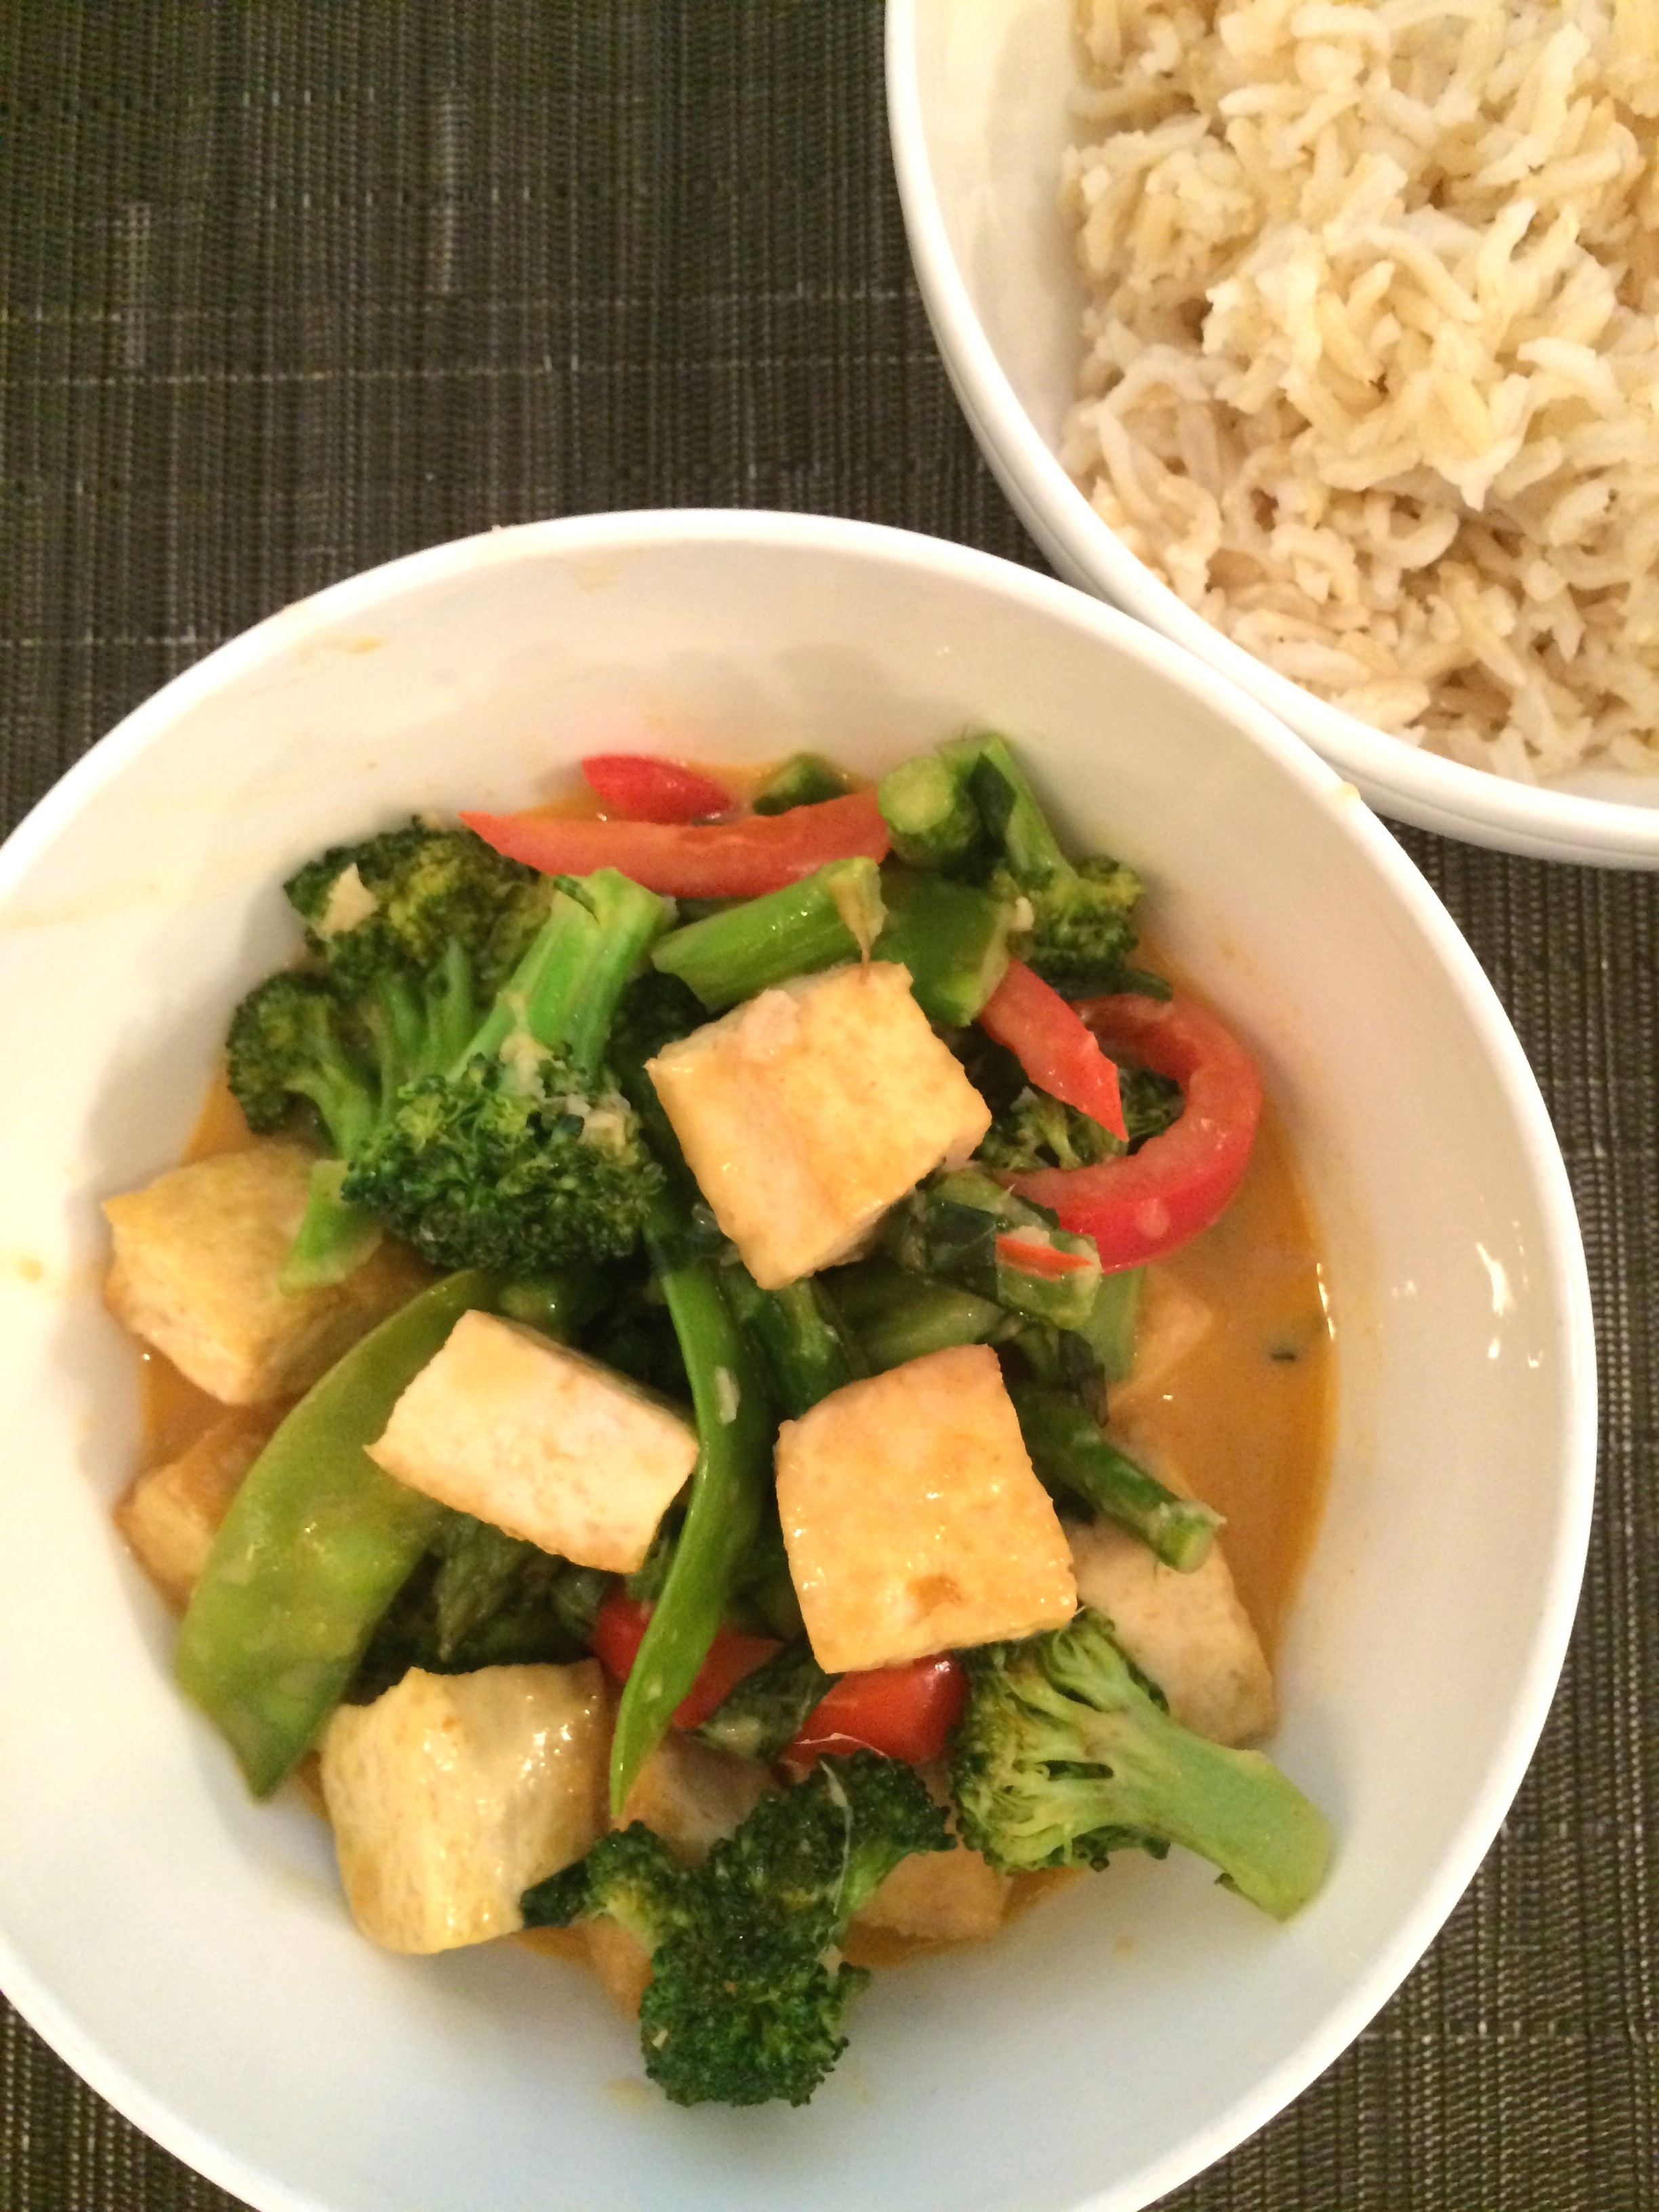 Coconut Red Curry With Tofu And Vegetables - The Pollan Family